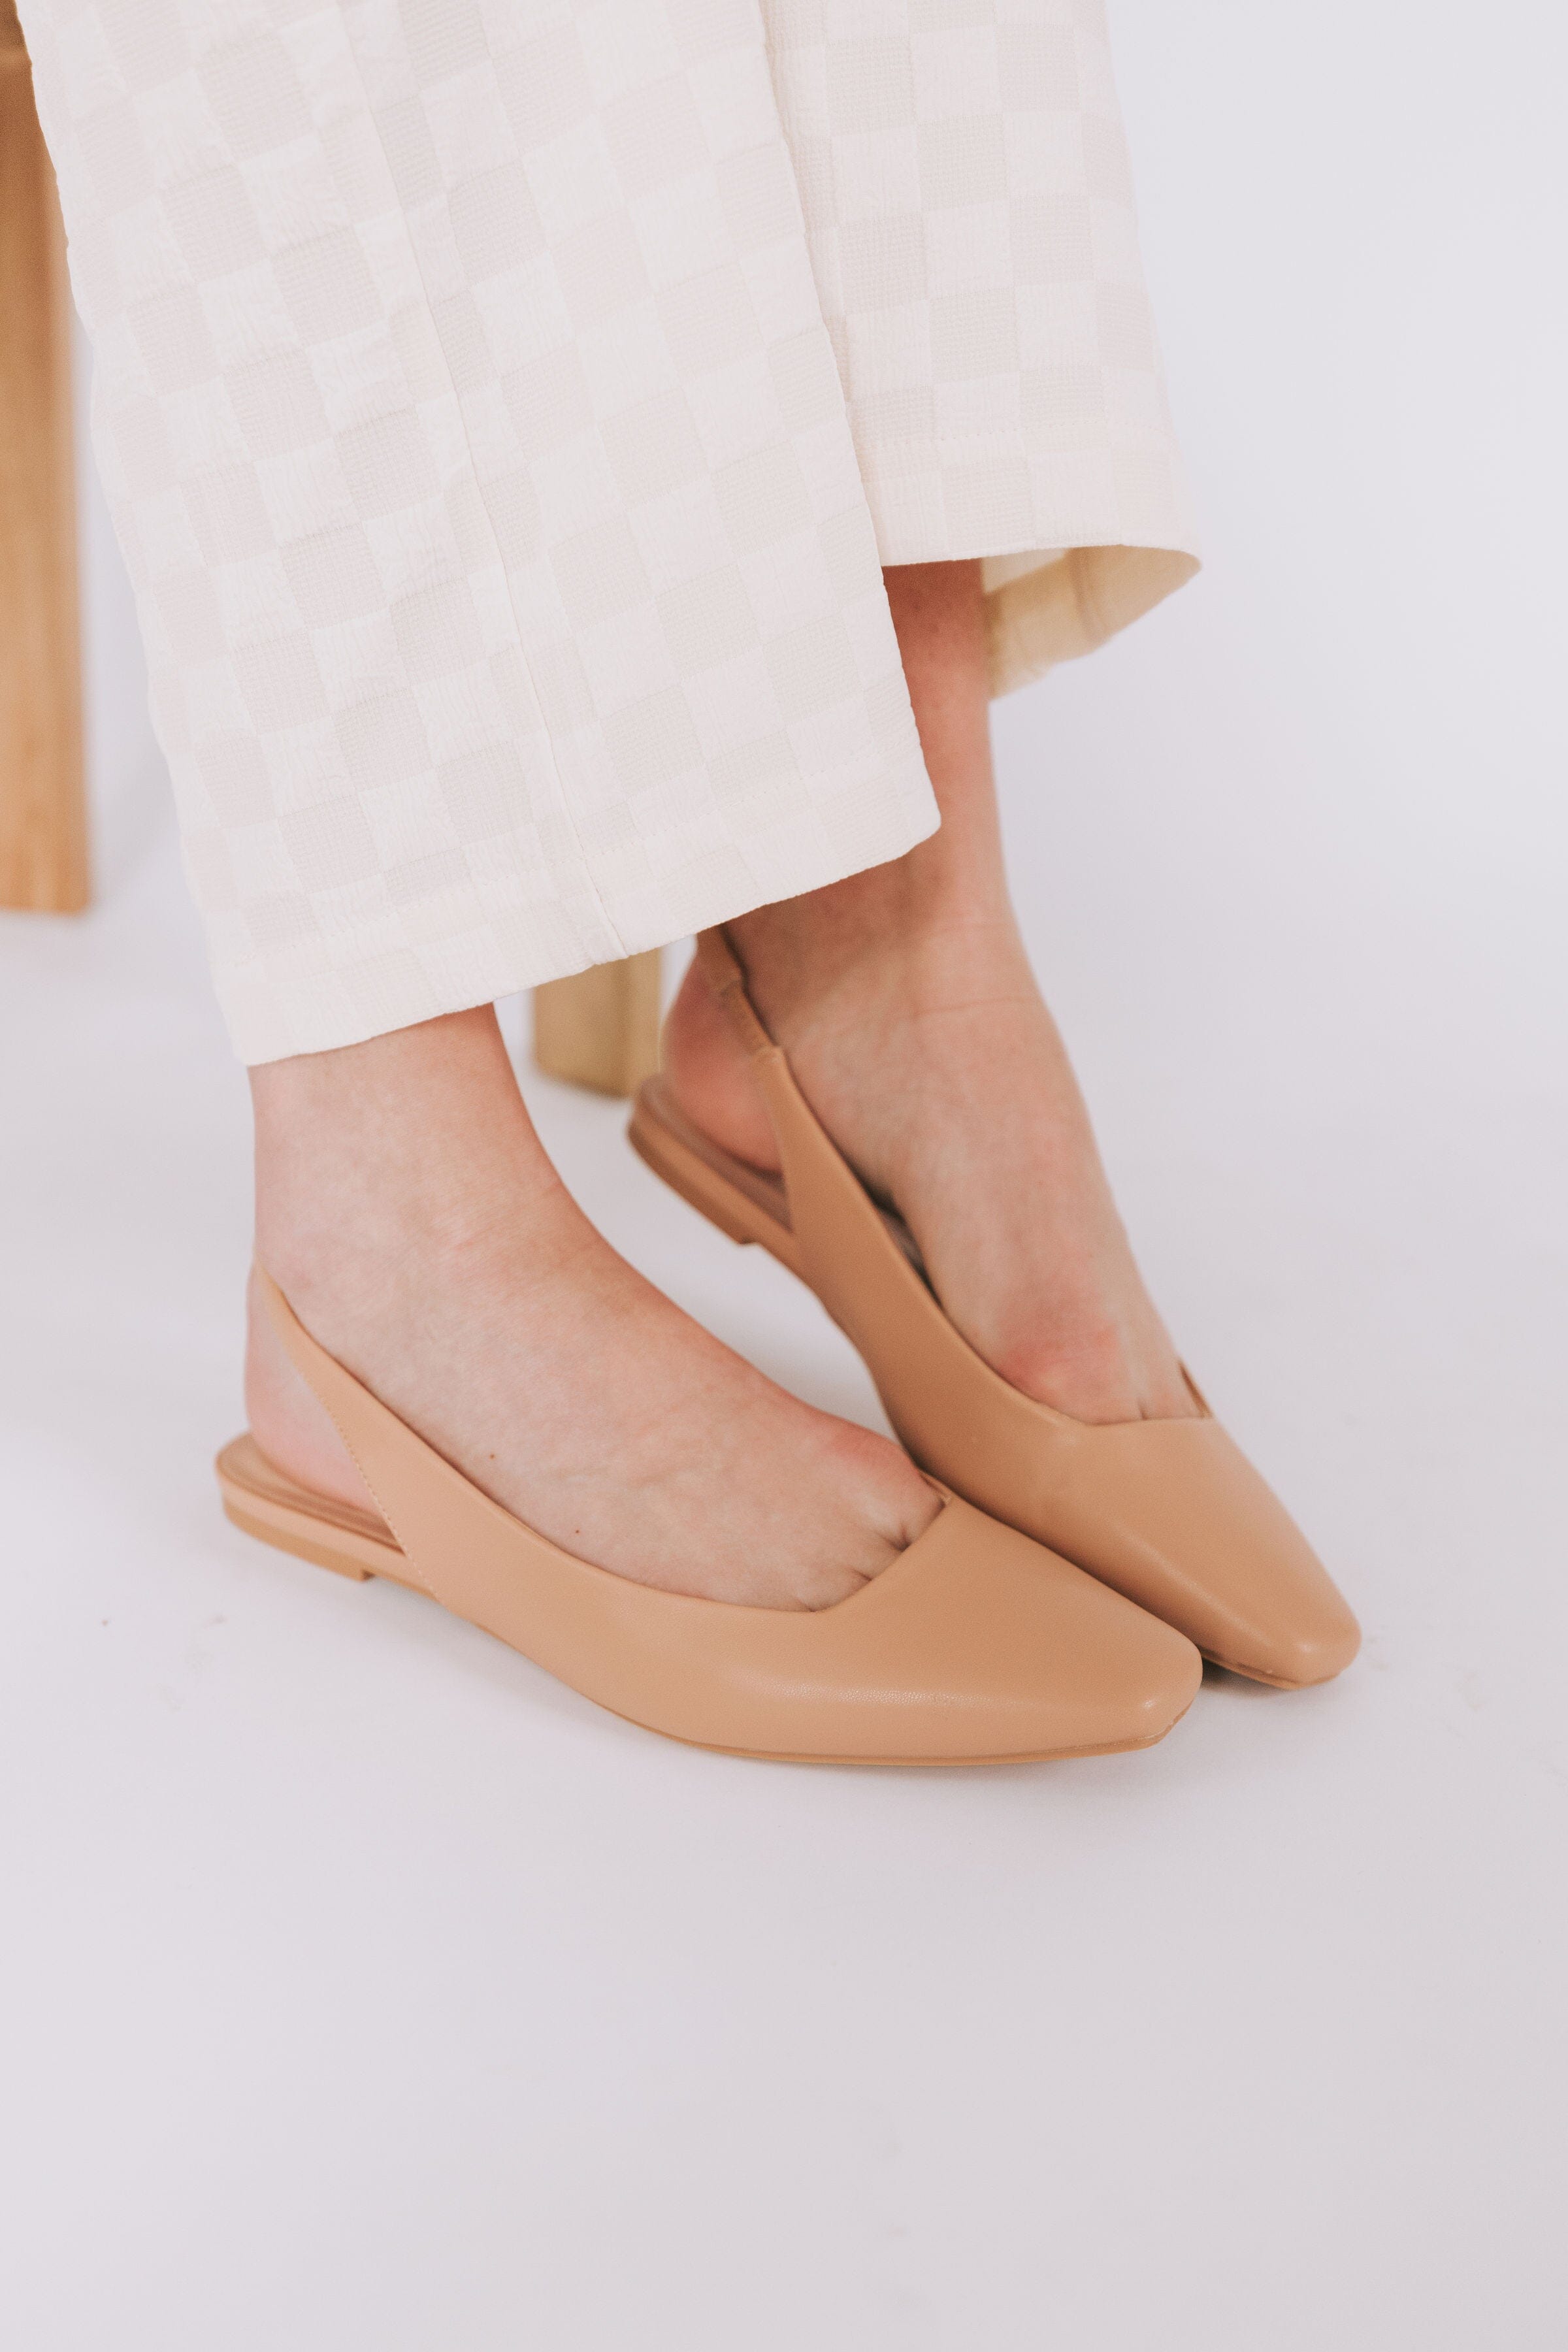 CHINESE LAUNDRY - Rhyme Time Slingback Flat